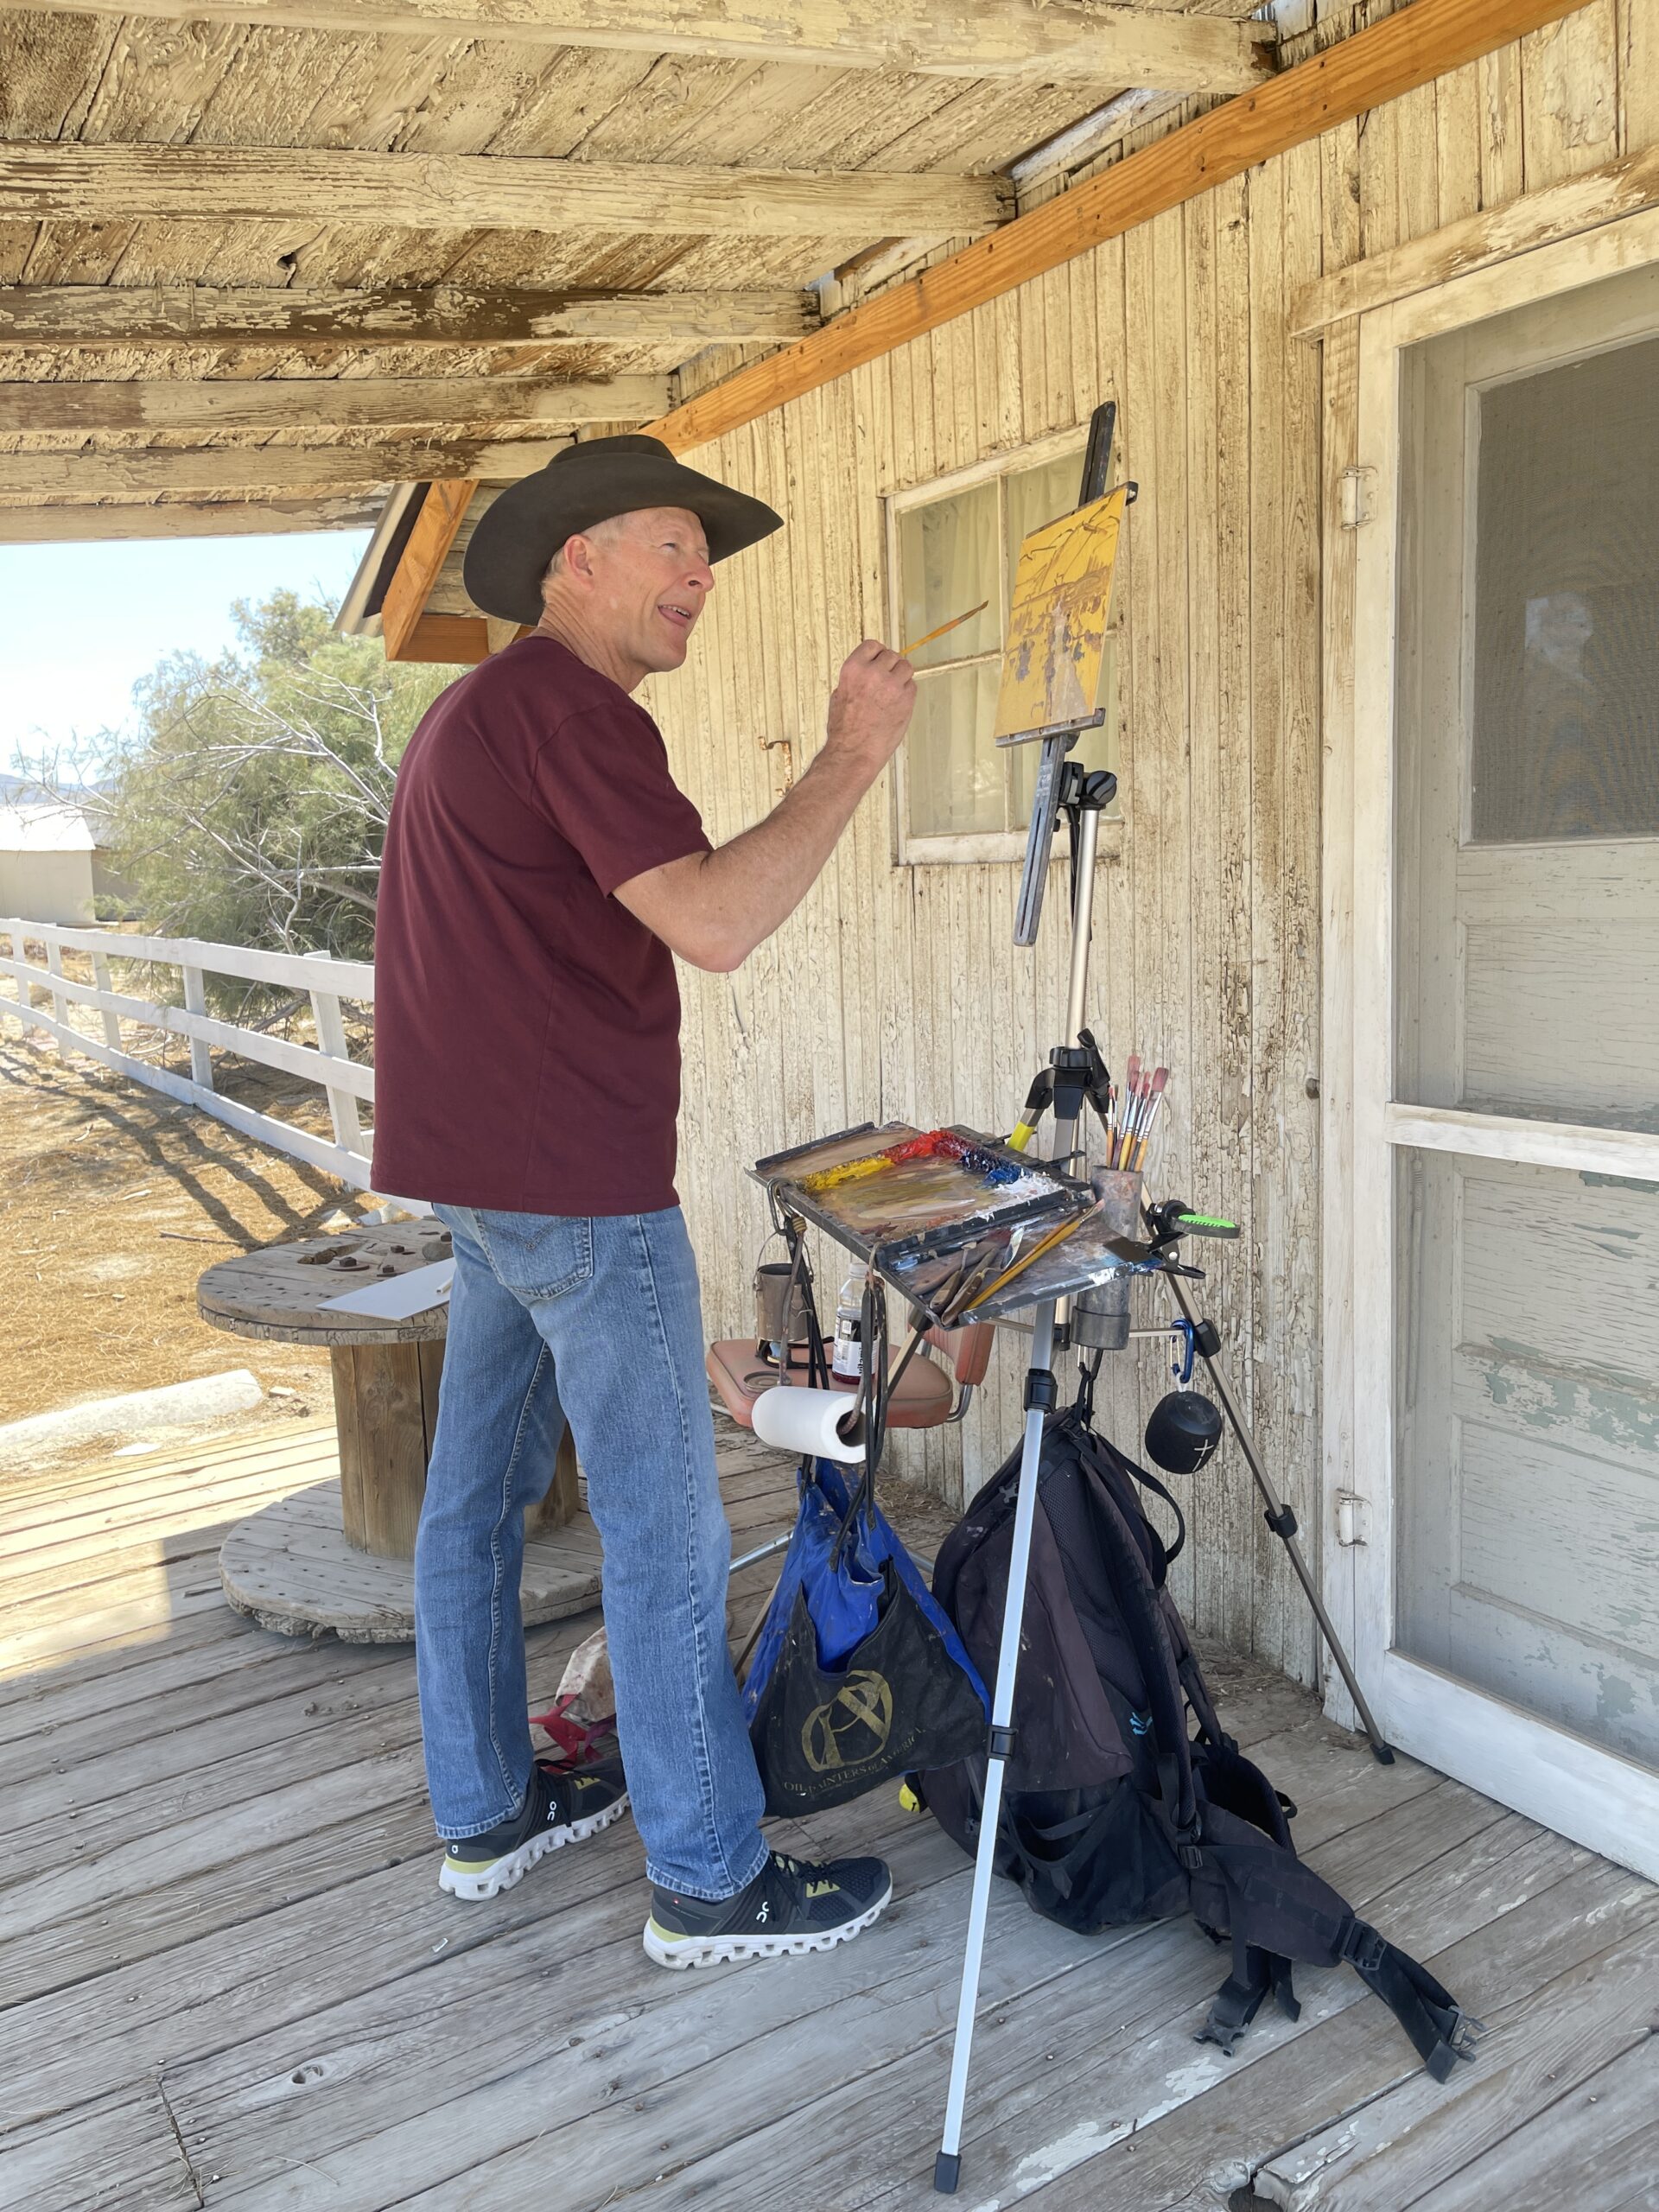 Jim Wodark painting during the Quick Draw. His oil painting, "Coyote Creek" won the Borrego Springs Plein Air Invitational in 2022.